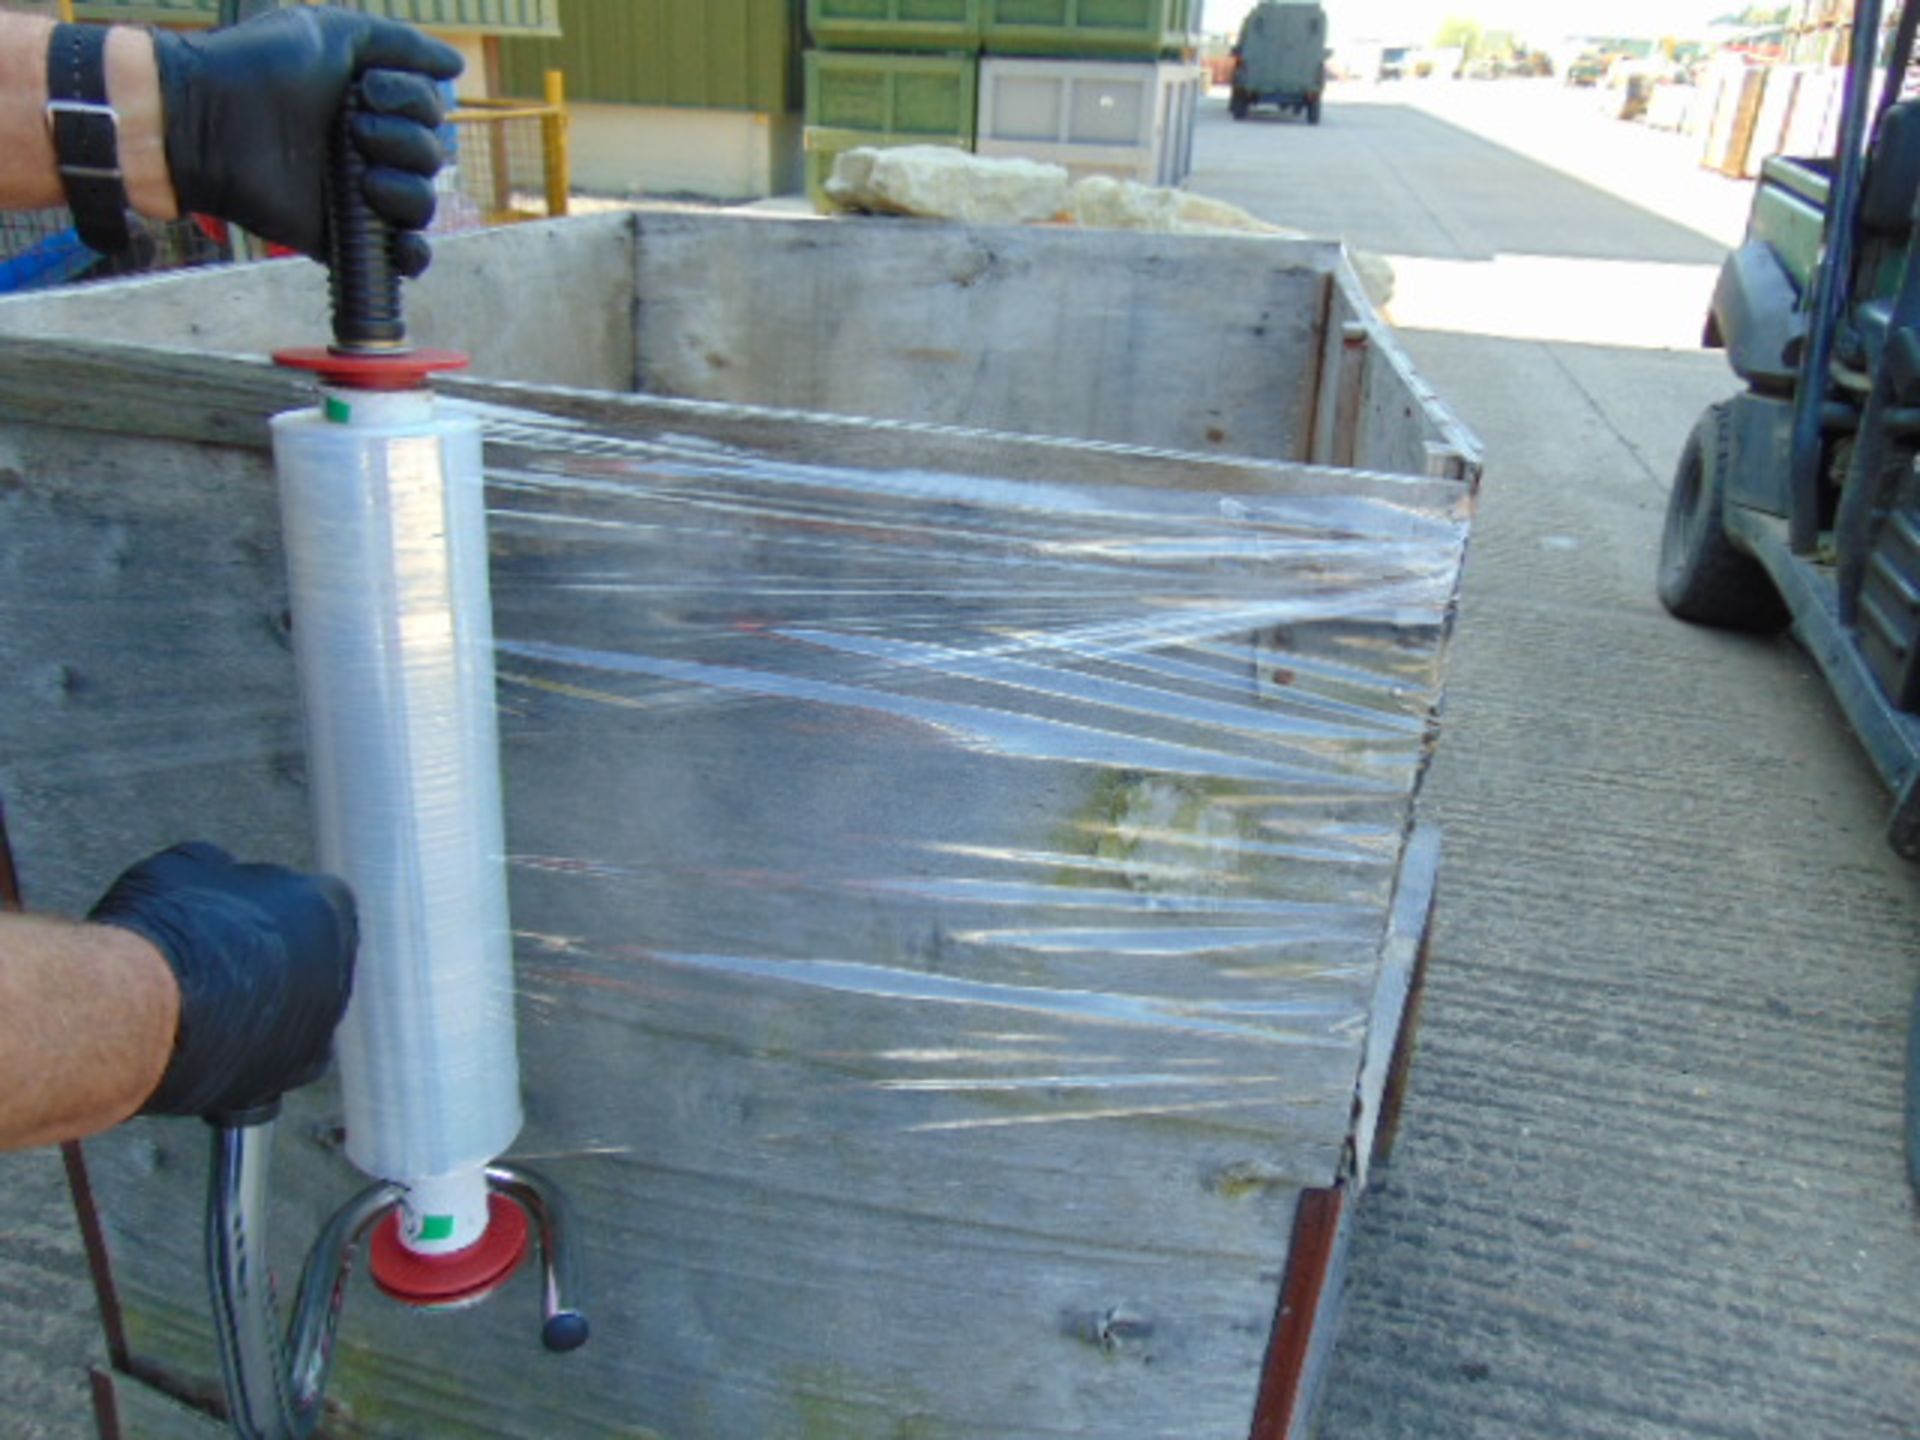 Q 5x New Unissued Shrink Wrap Roller / Disperser in Original Packing from MoD - Image 4 of 7